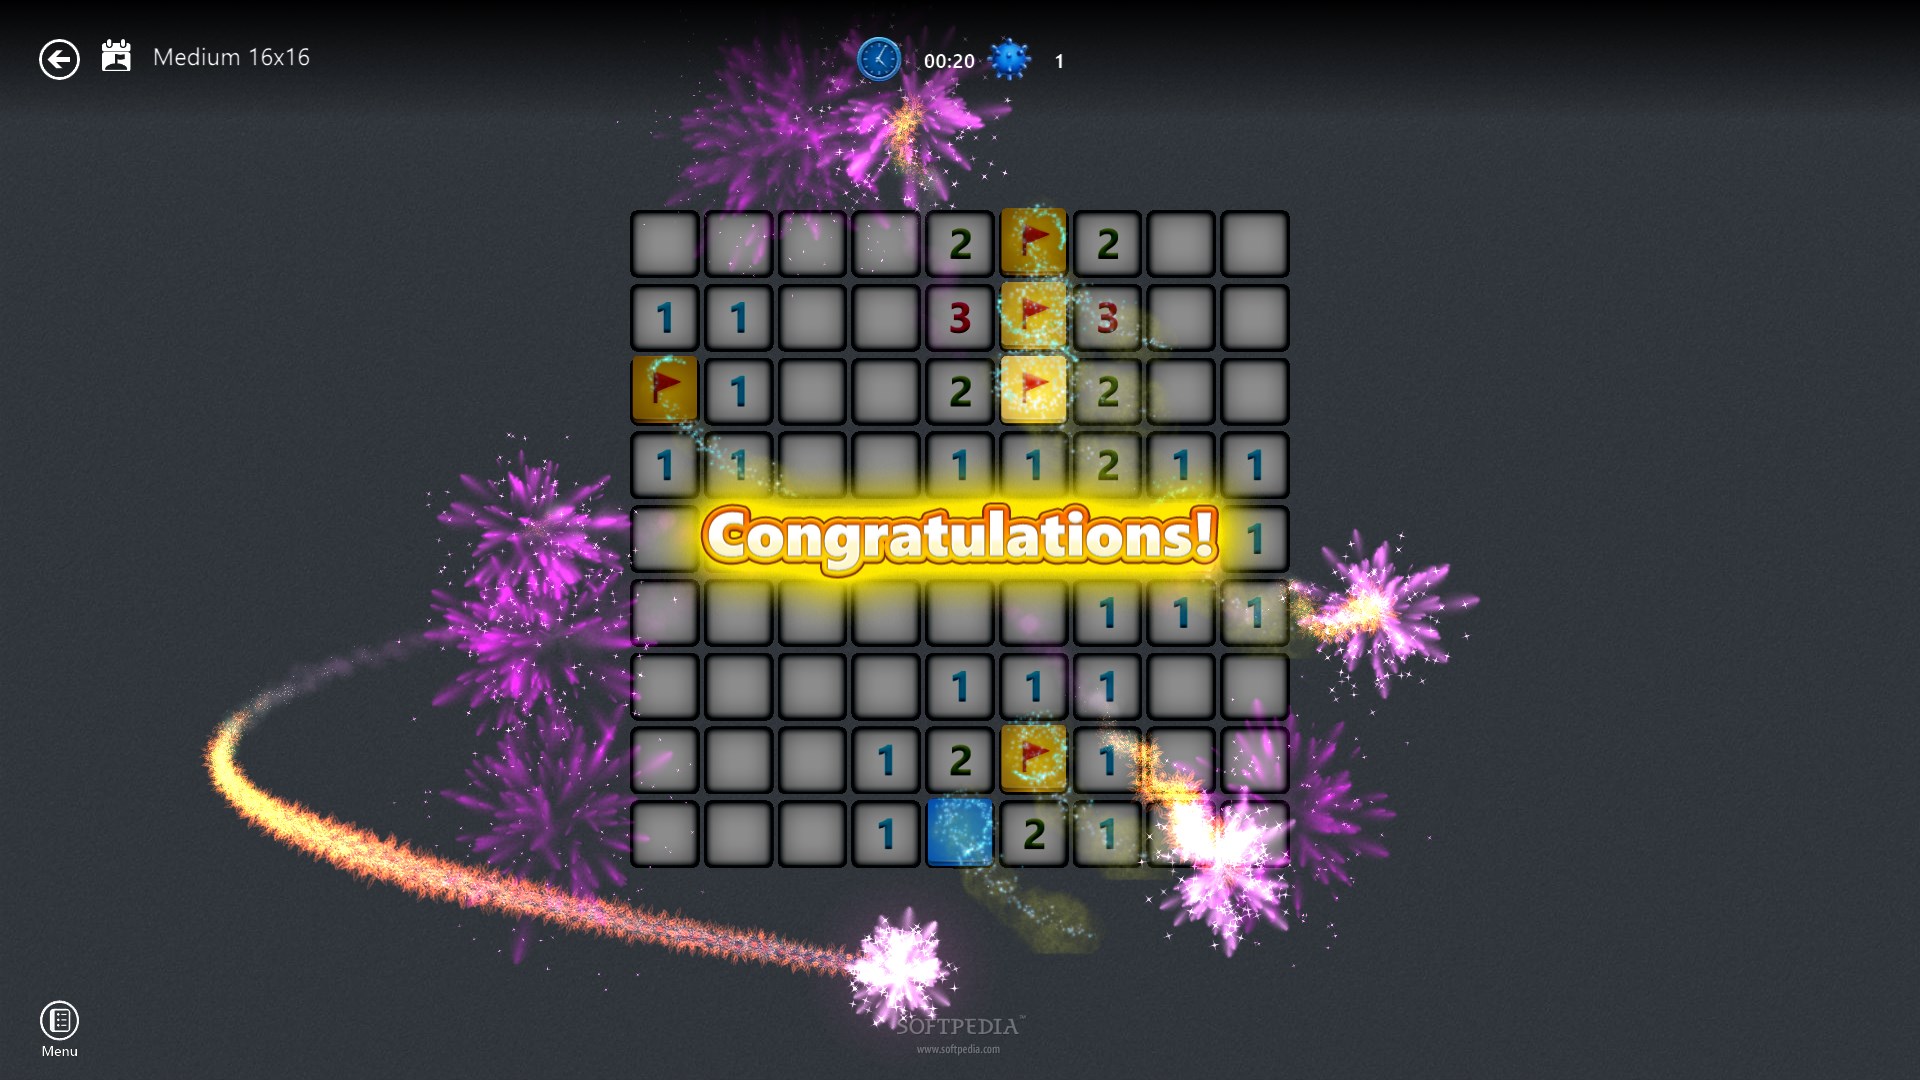 failure to download daily challenge microsoft minesweeper